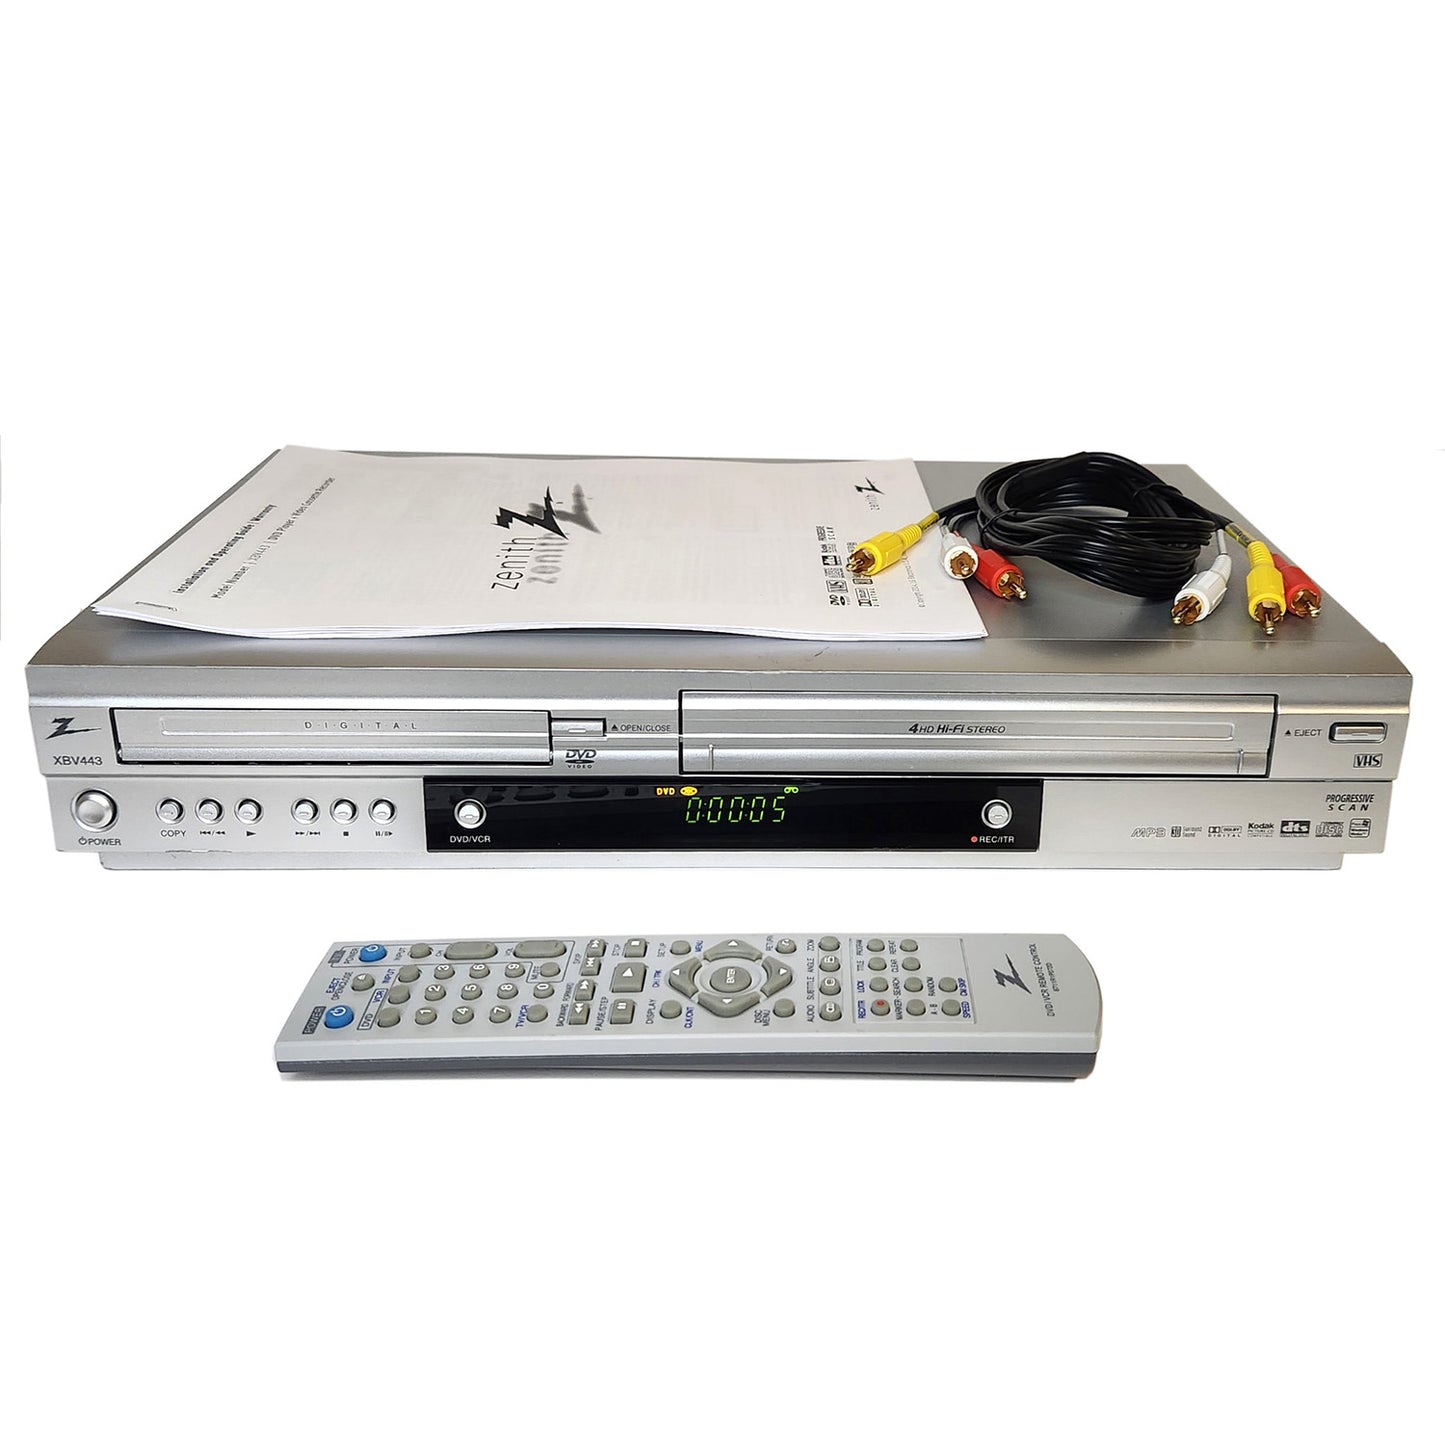 Zenith XBV443 VCR/DVD Player Combo